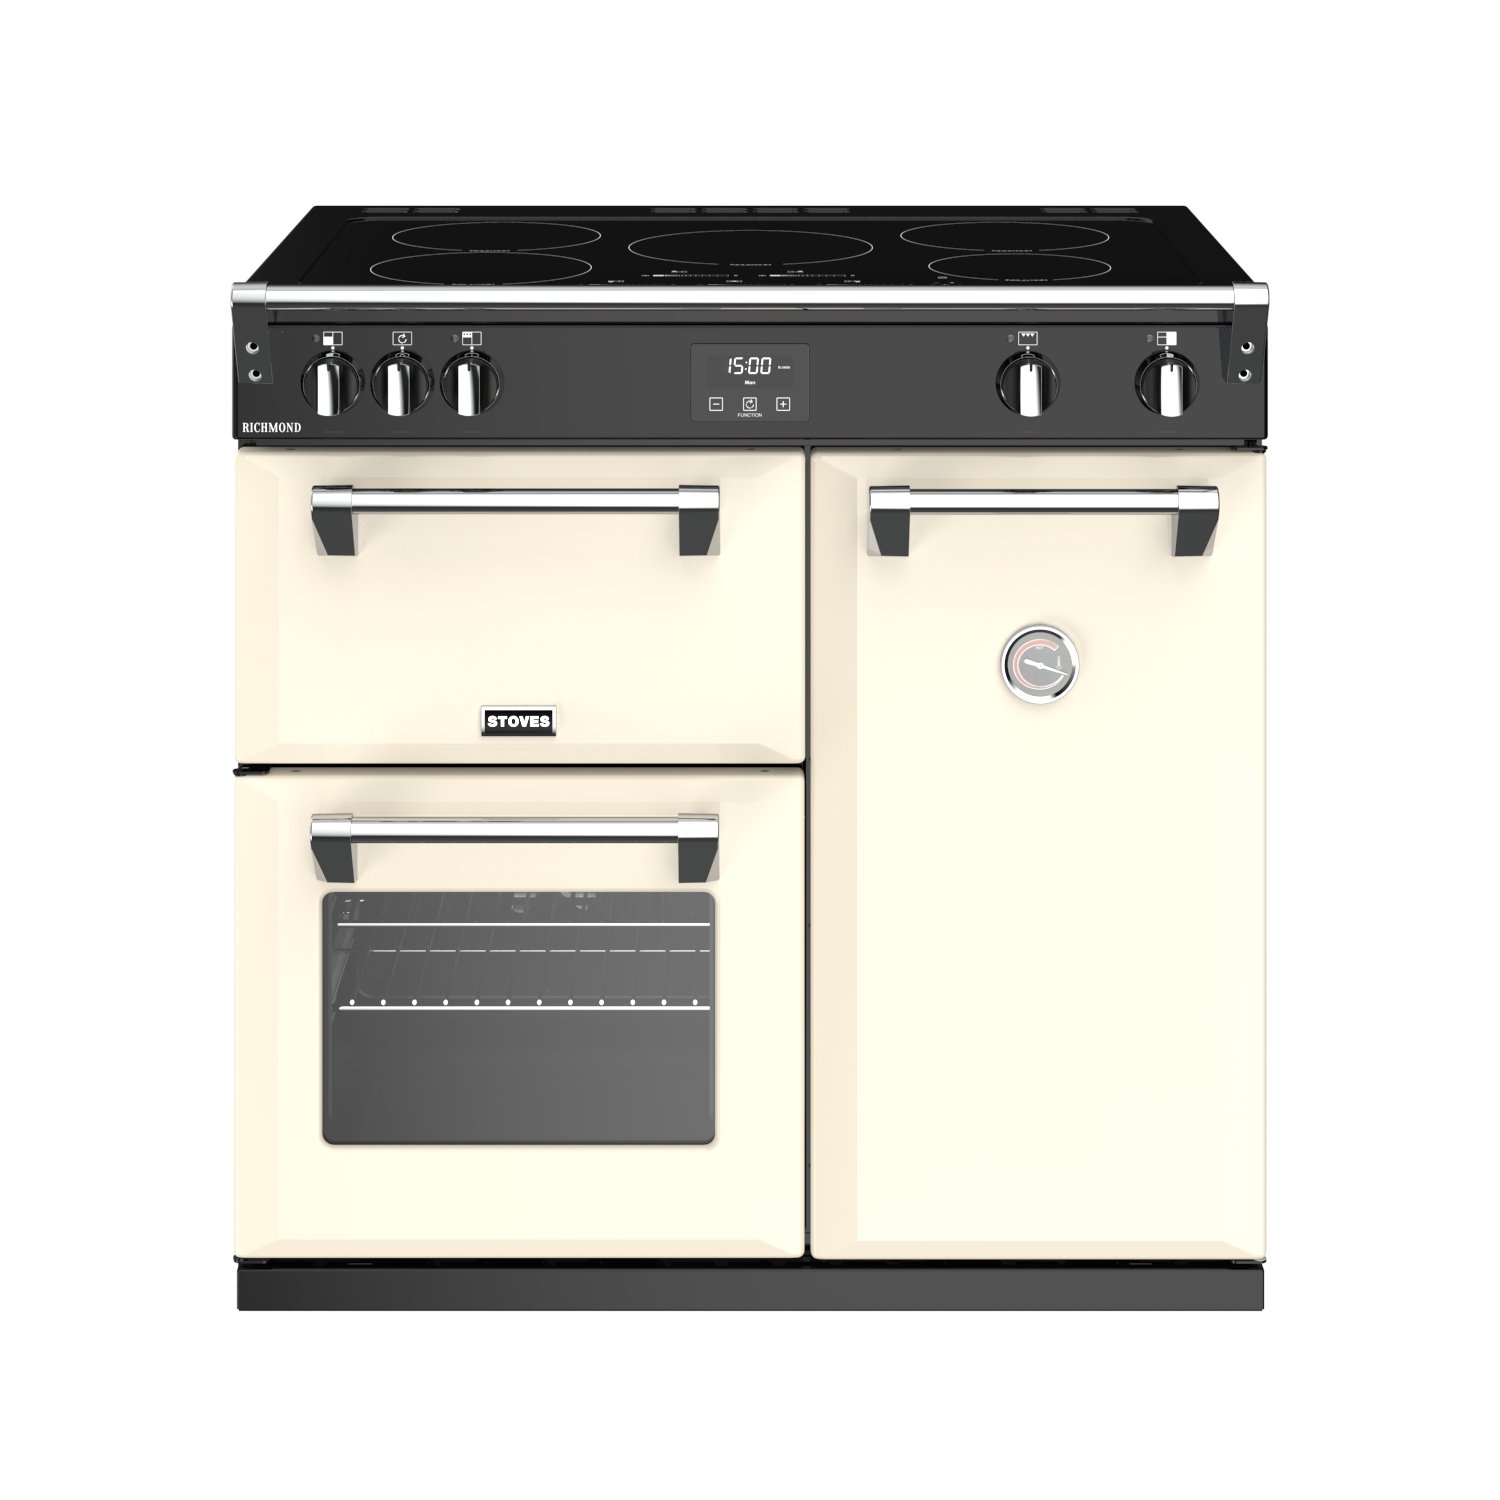 90cm Electric Induction Range Cooker With A 5 Zone Induction Hob, Conventional Oven & Grill, Multifunction Main Oven And Tall Fanned Oven. Requires 32A connection.